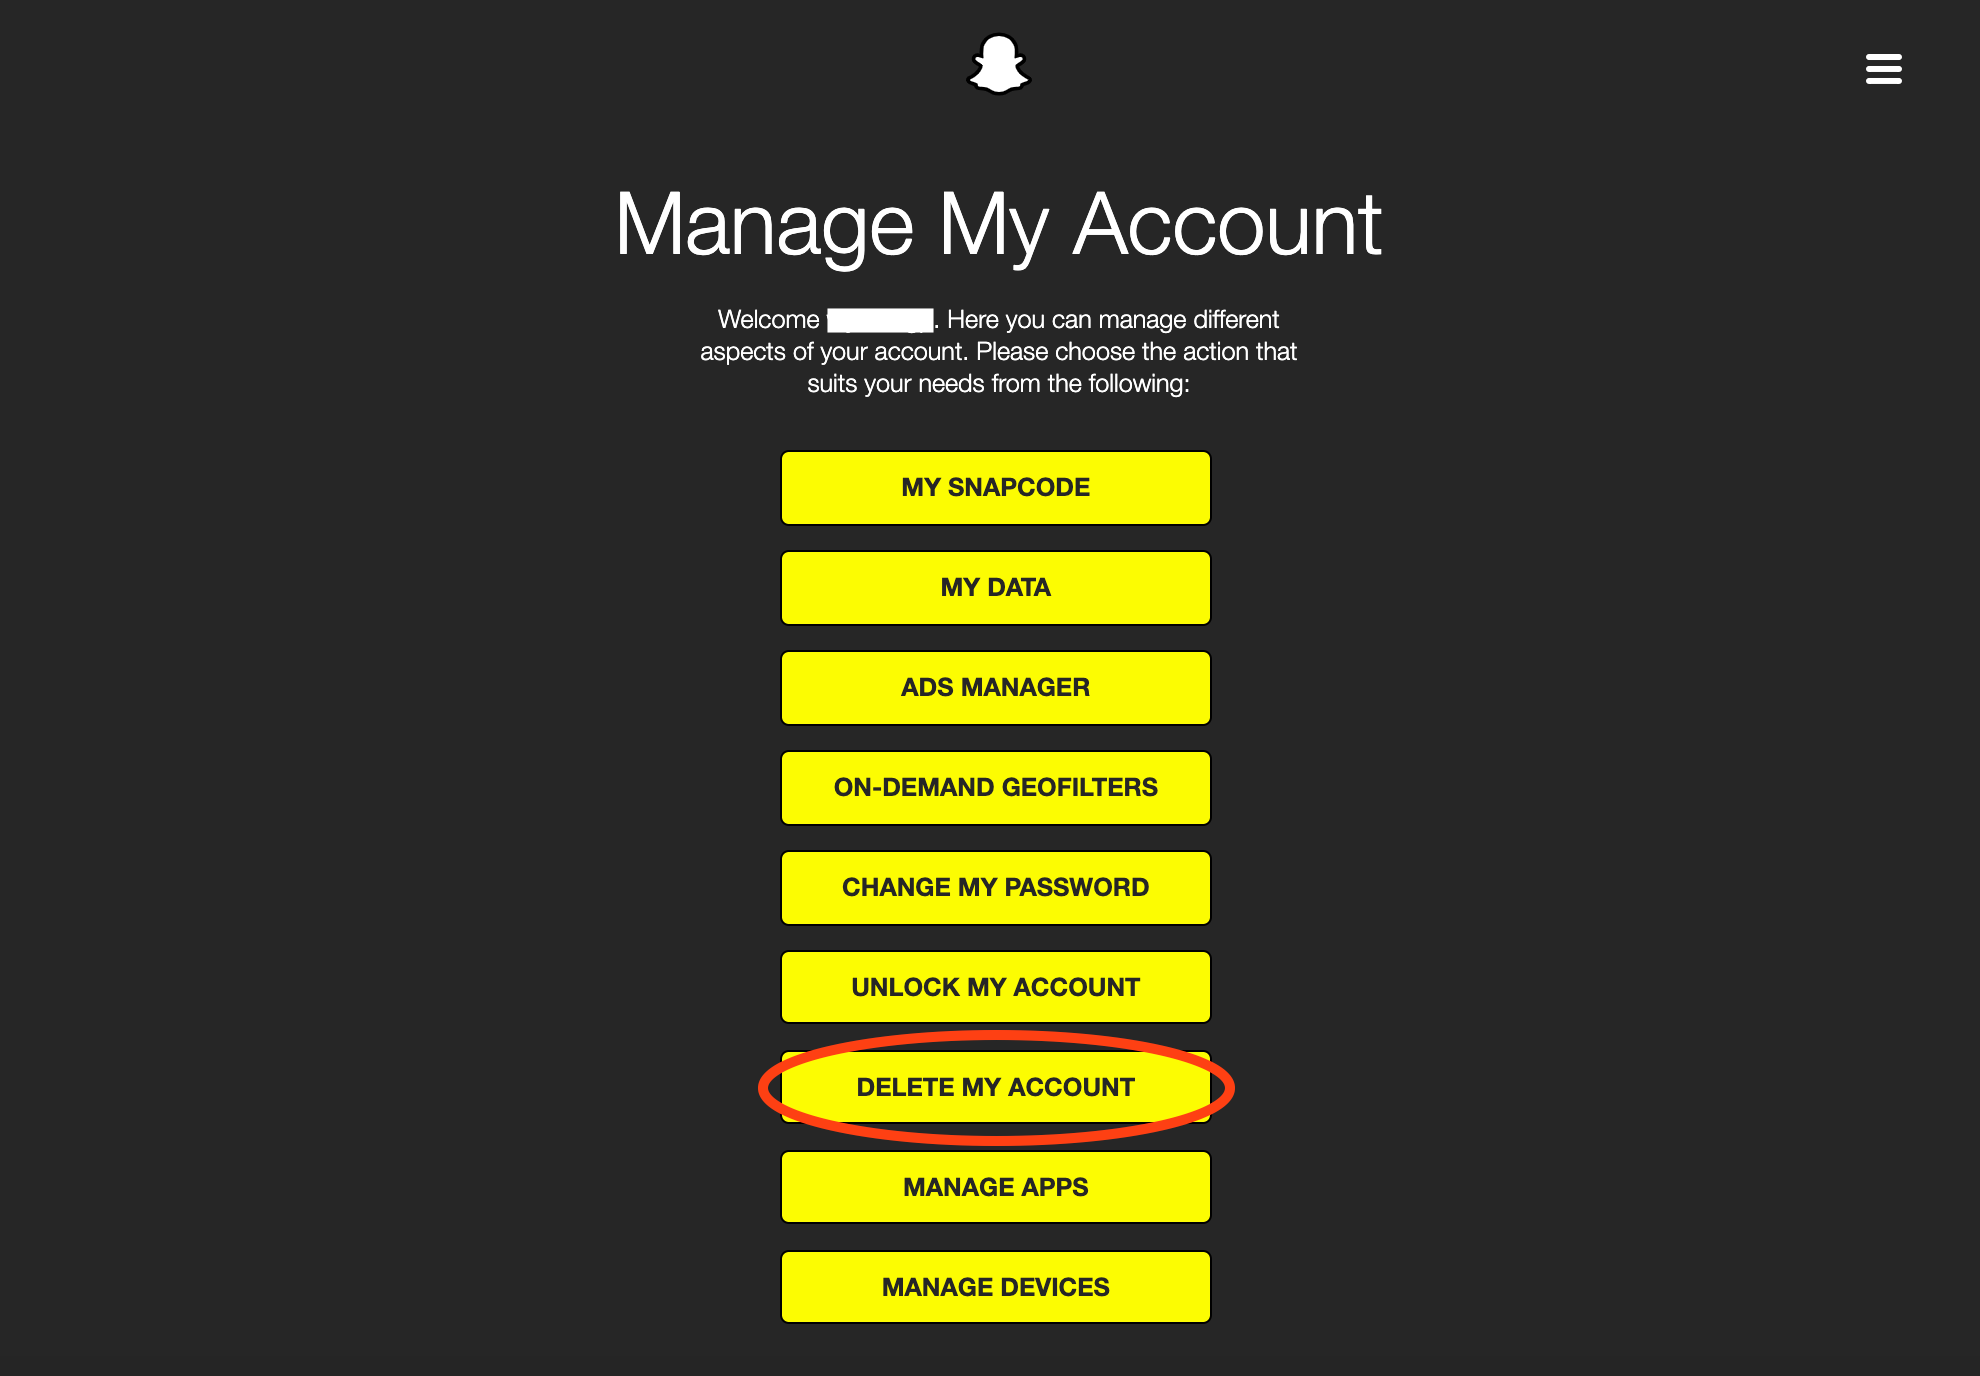 Ready to say goodbye to Snapchat? Here's how to permanently delete or deactivate your account